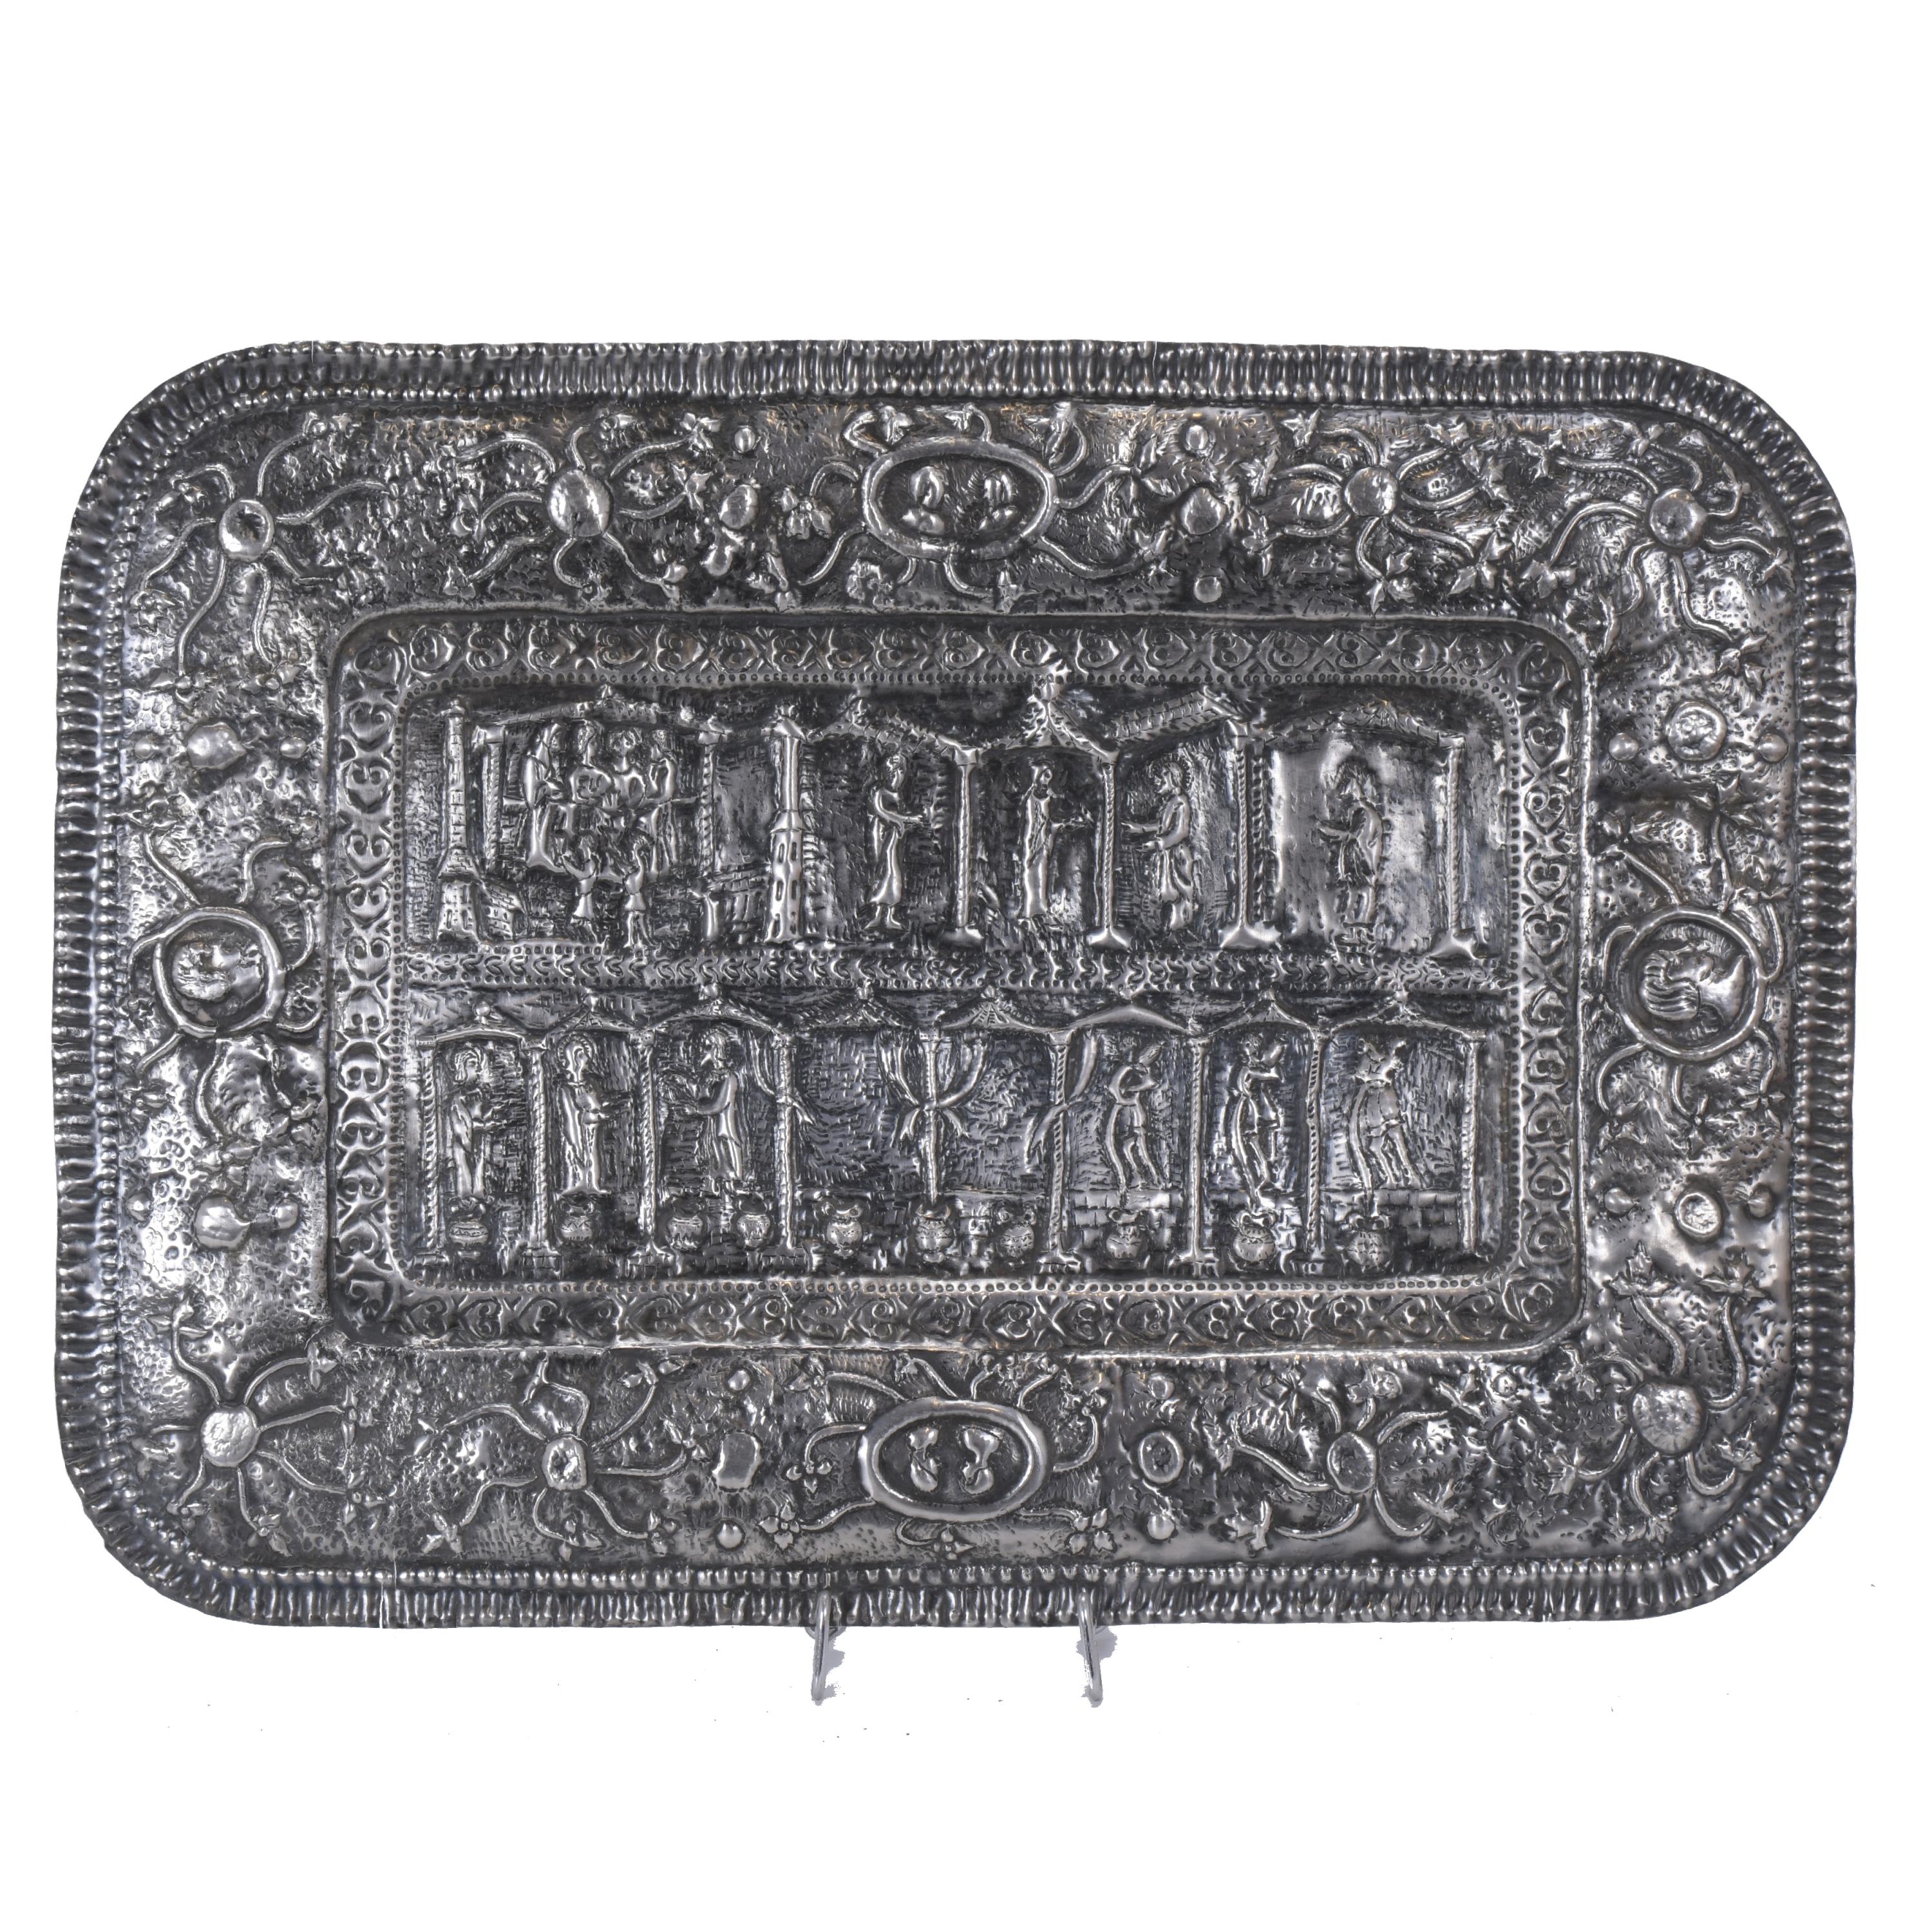 EMBOSSED SILVER TRAY. 